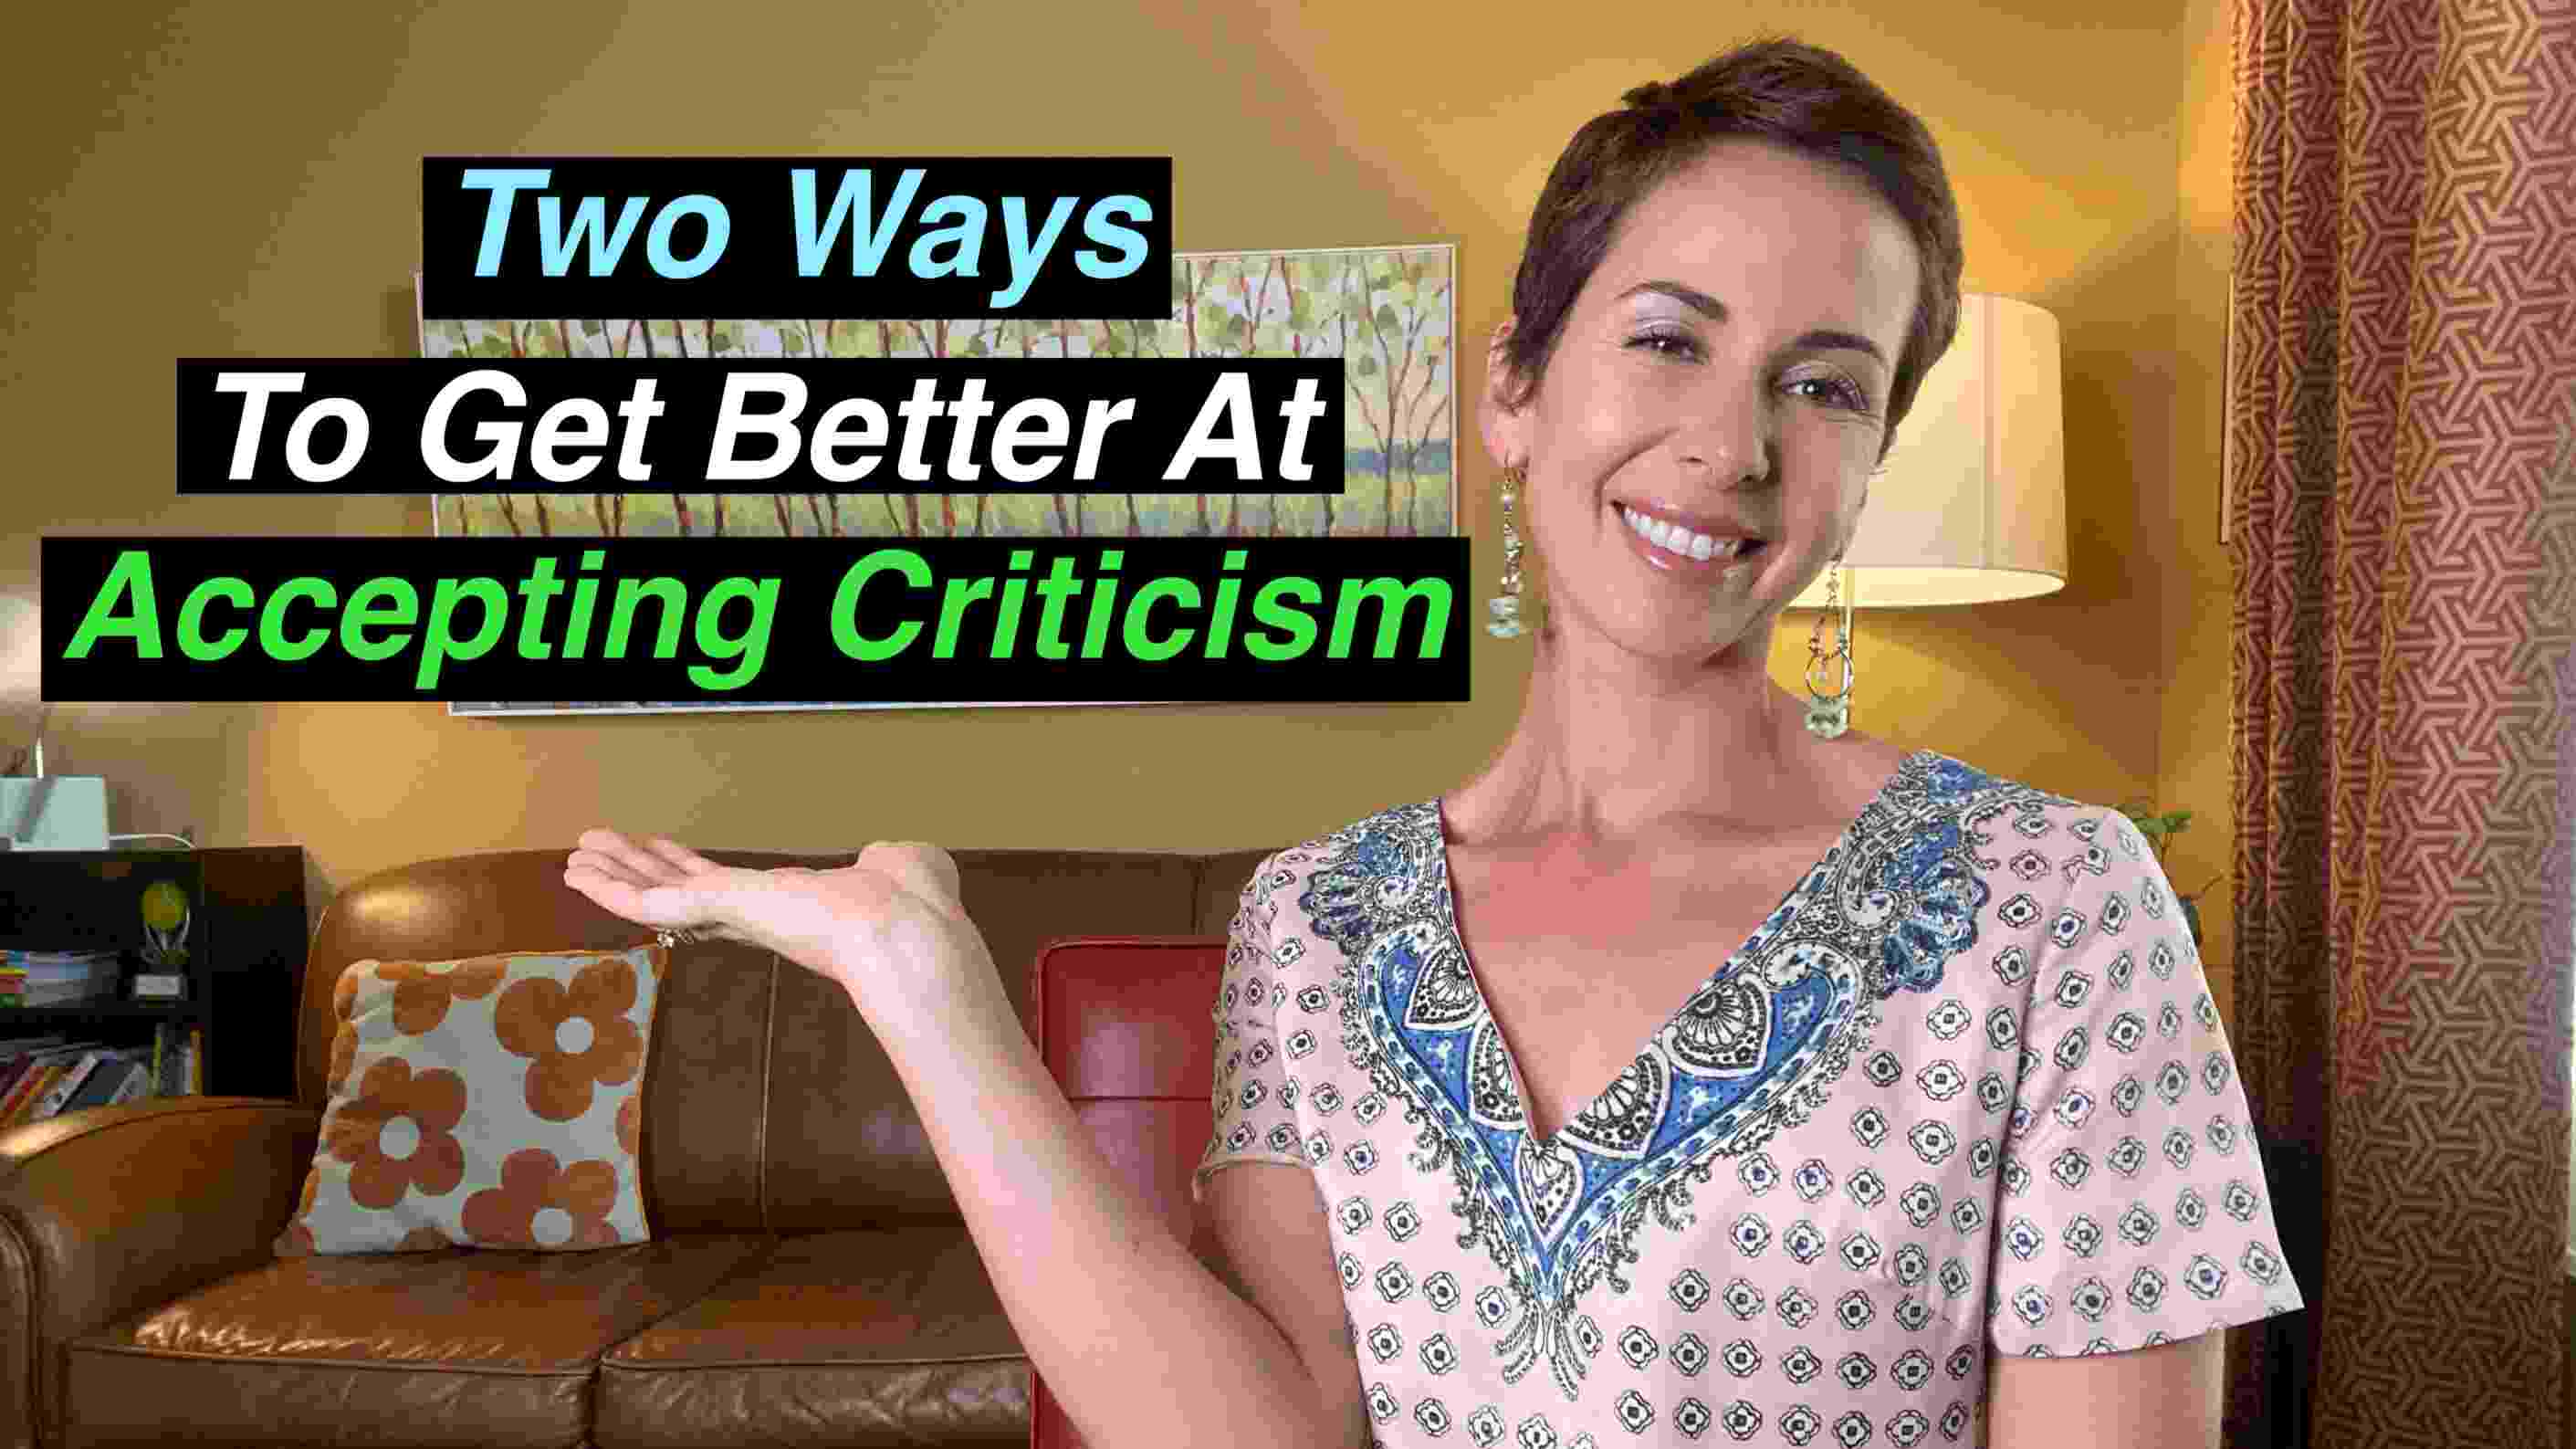 
Jourdan Travers, LCSW discusses ways to get better at handling criticism
